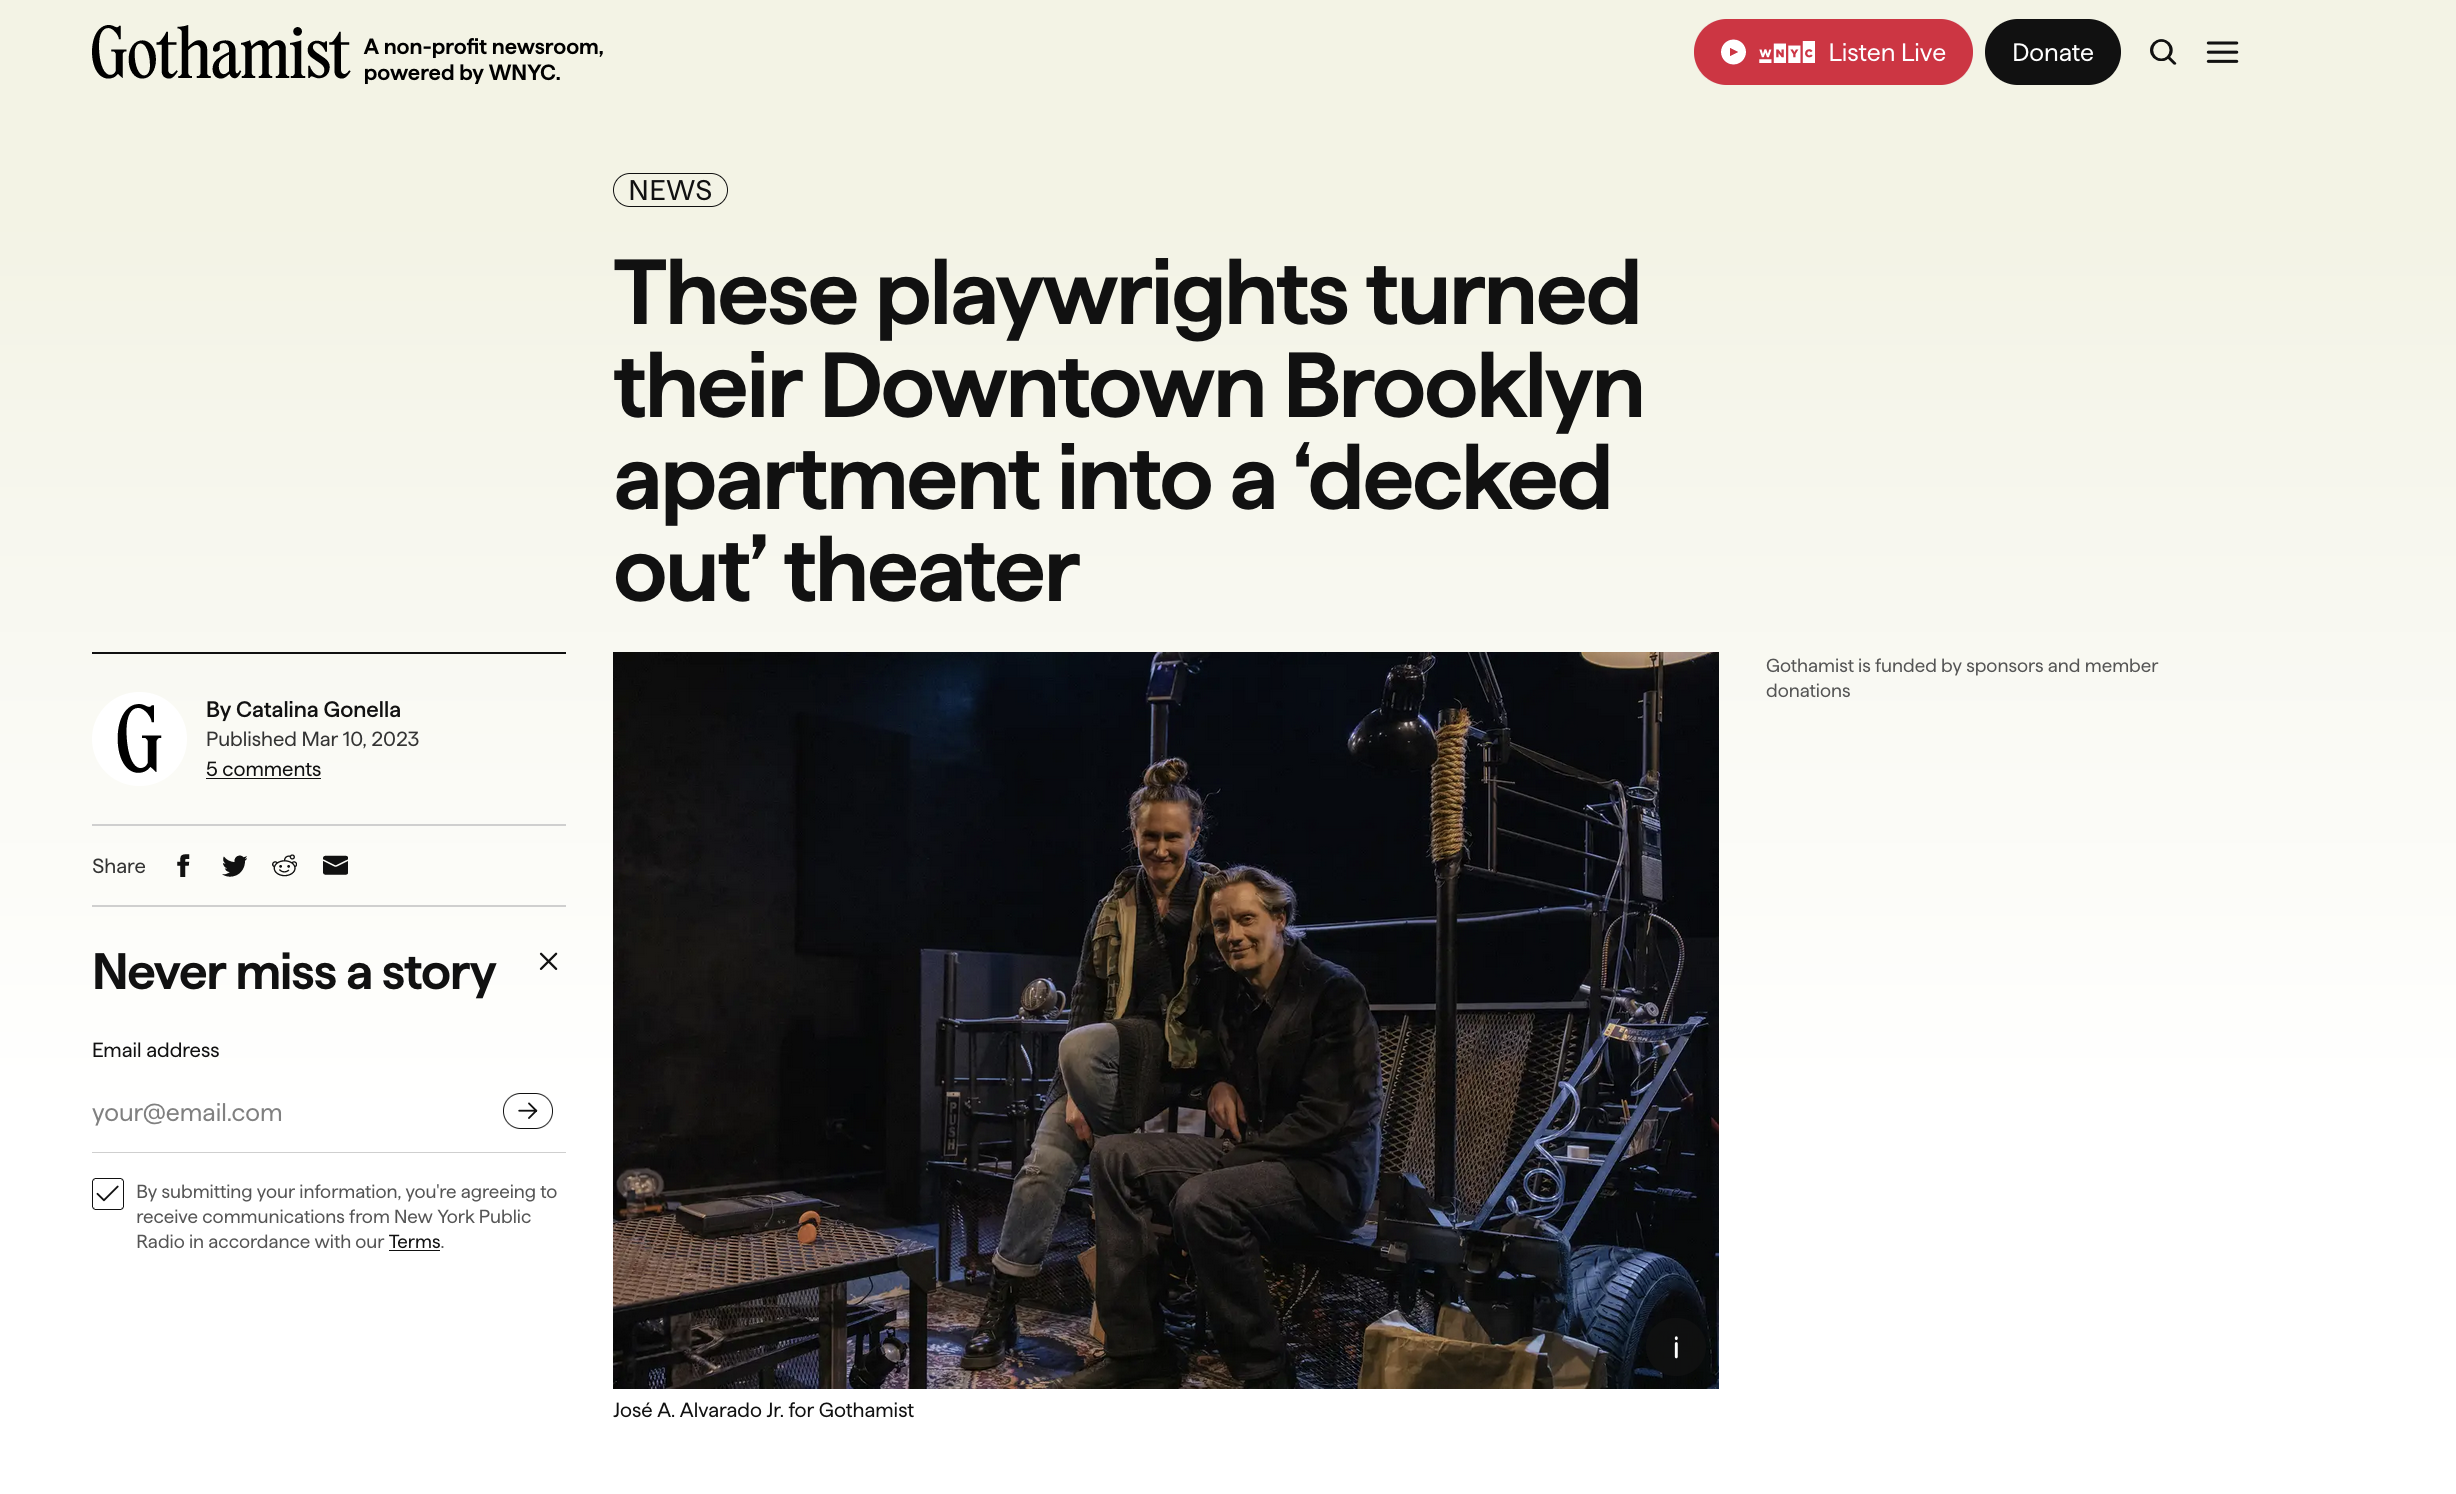 for Gothamist: These playwrights turned their Downtown Brooklyn apartment into a ‘decked out’ theater